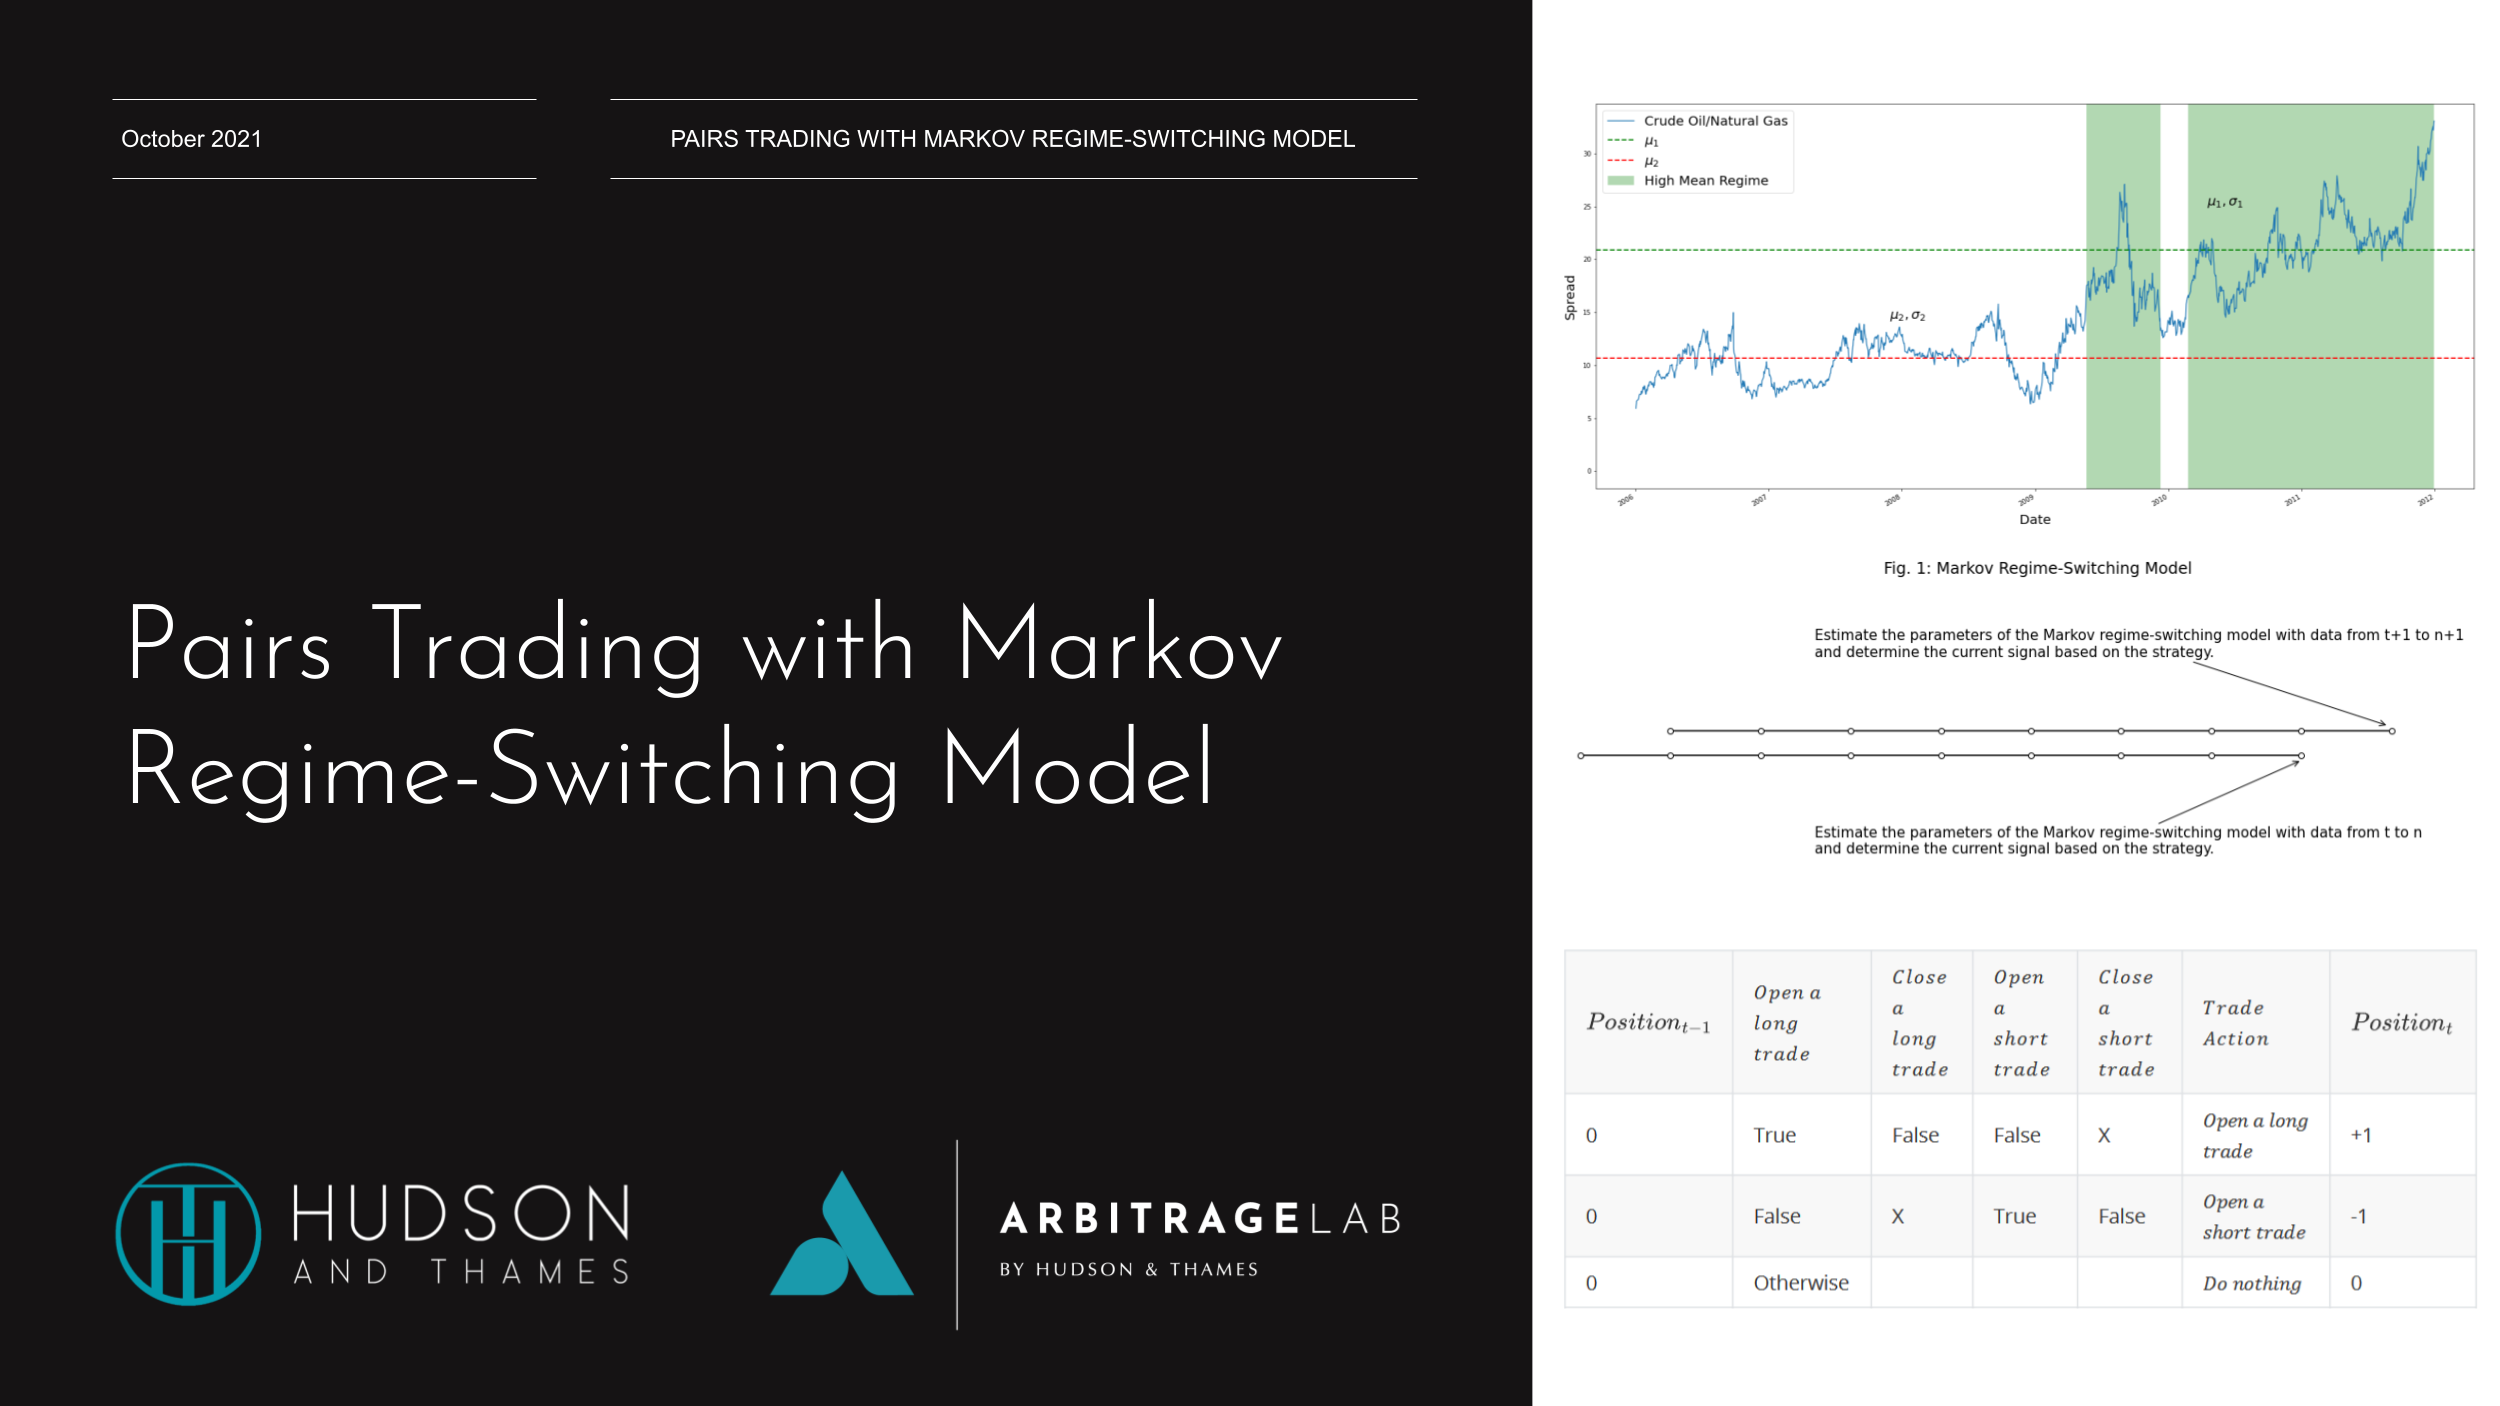 Pairs Trading with Markov Regime-Switching Model